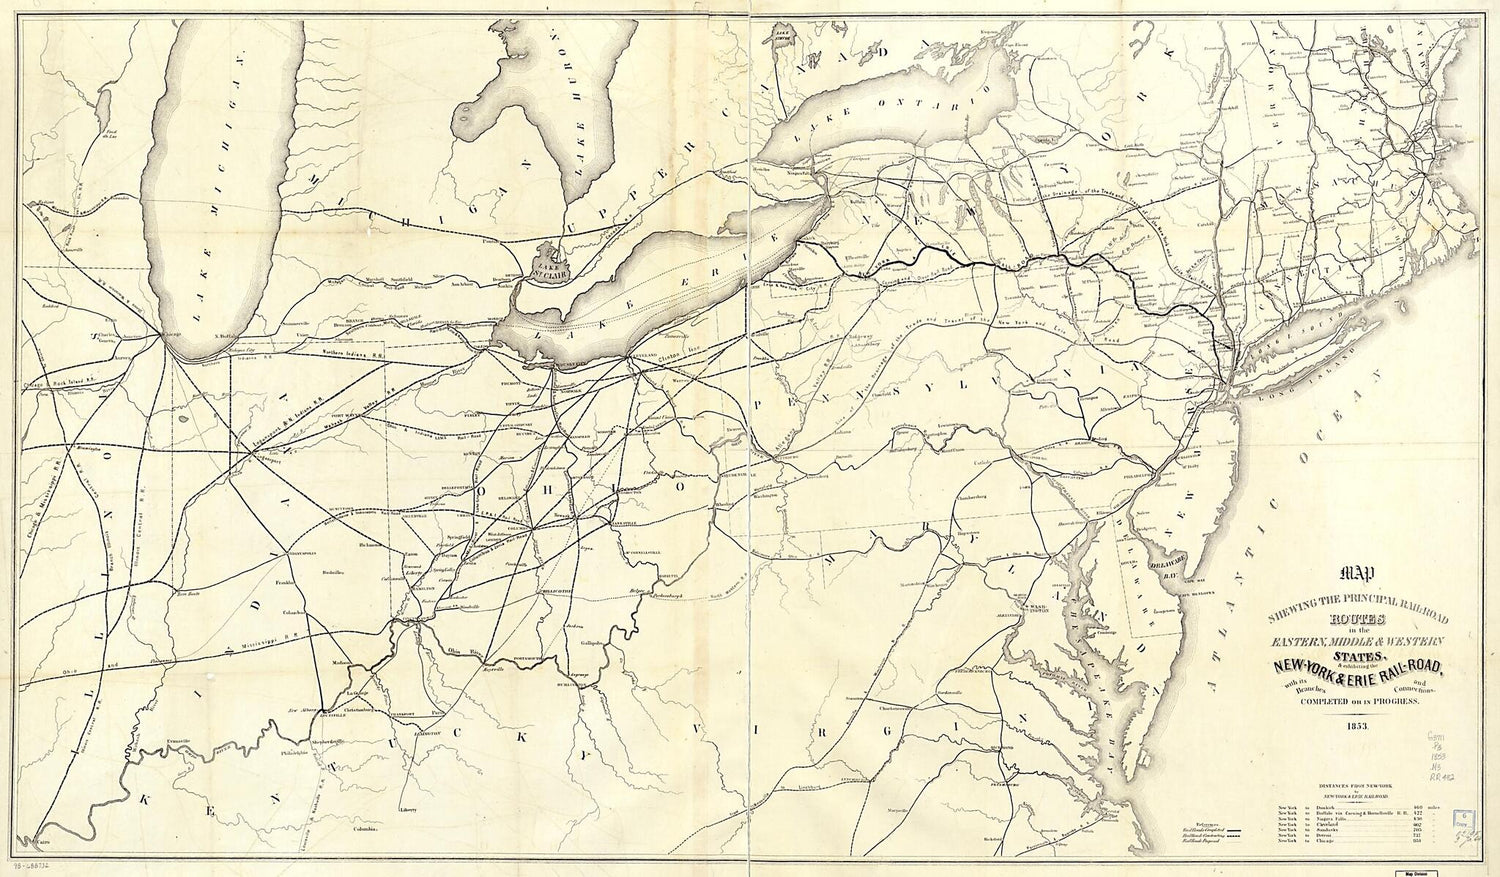 This old map of Road Routes In the Eastern, Middle &amp; Western States, &amp; Exhibiting the New-York &amp; Erie Rail-Road, With Its Branches and Connections, Completed Or In Progress from 1853 was created by  New York and Erie Railroad Company in 1853